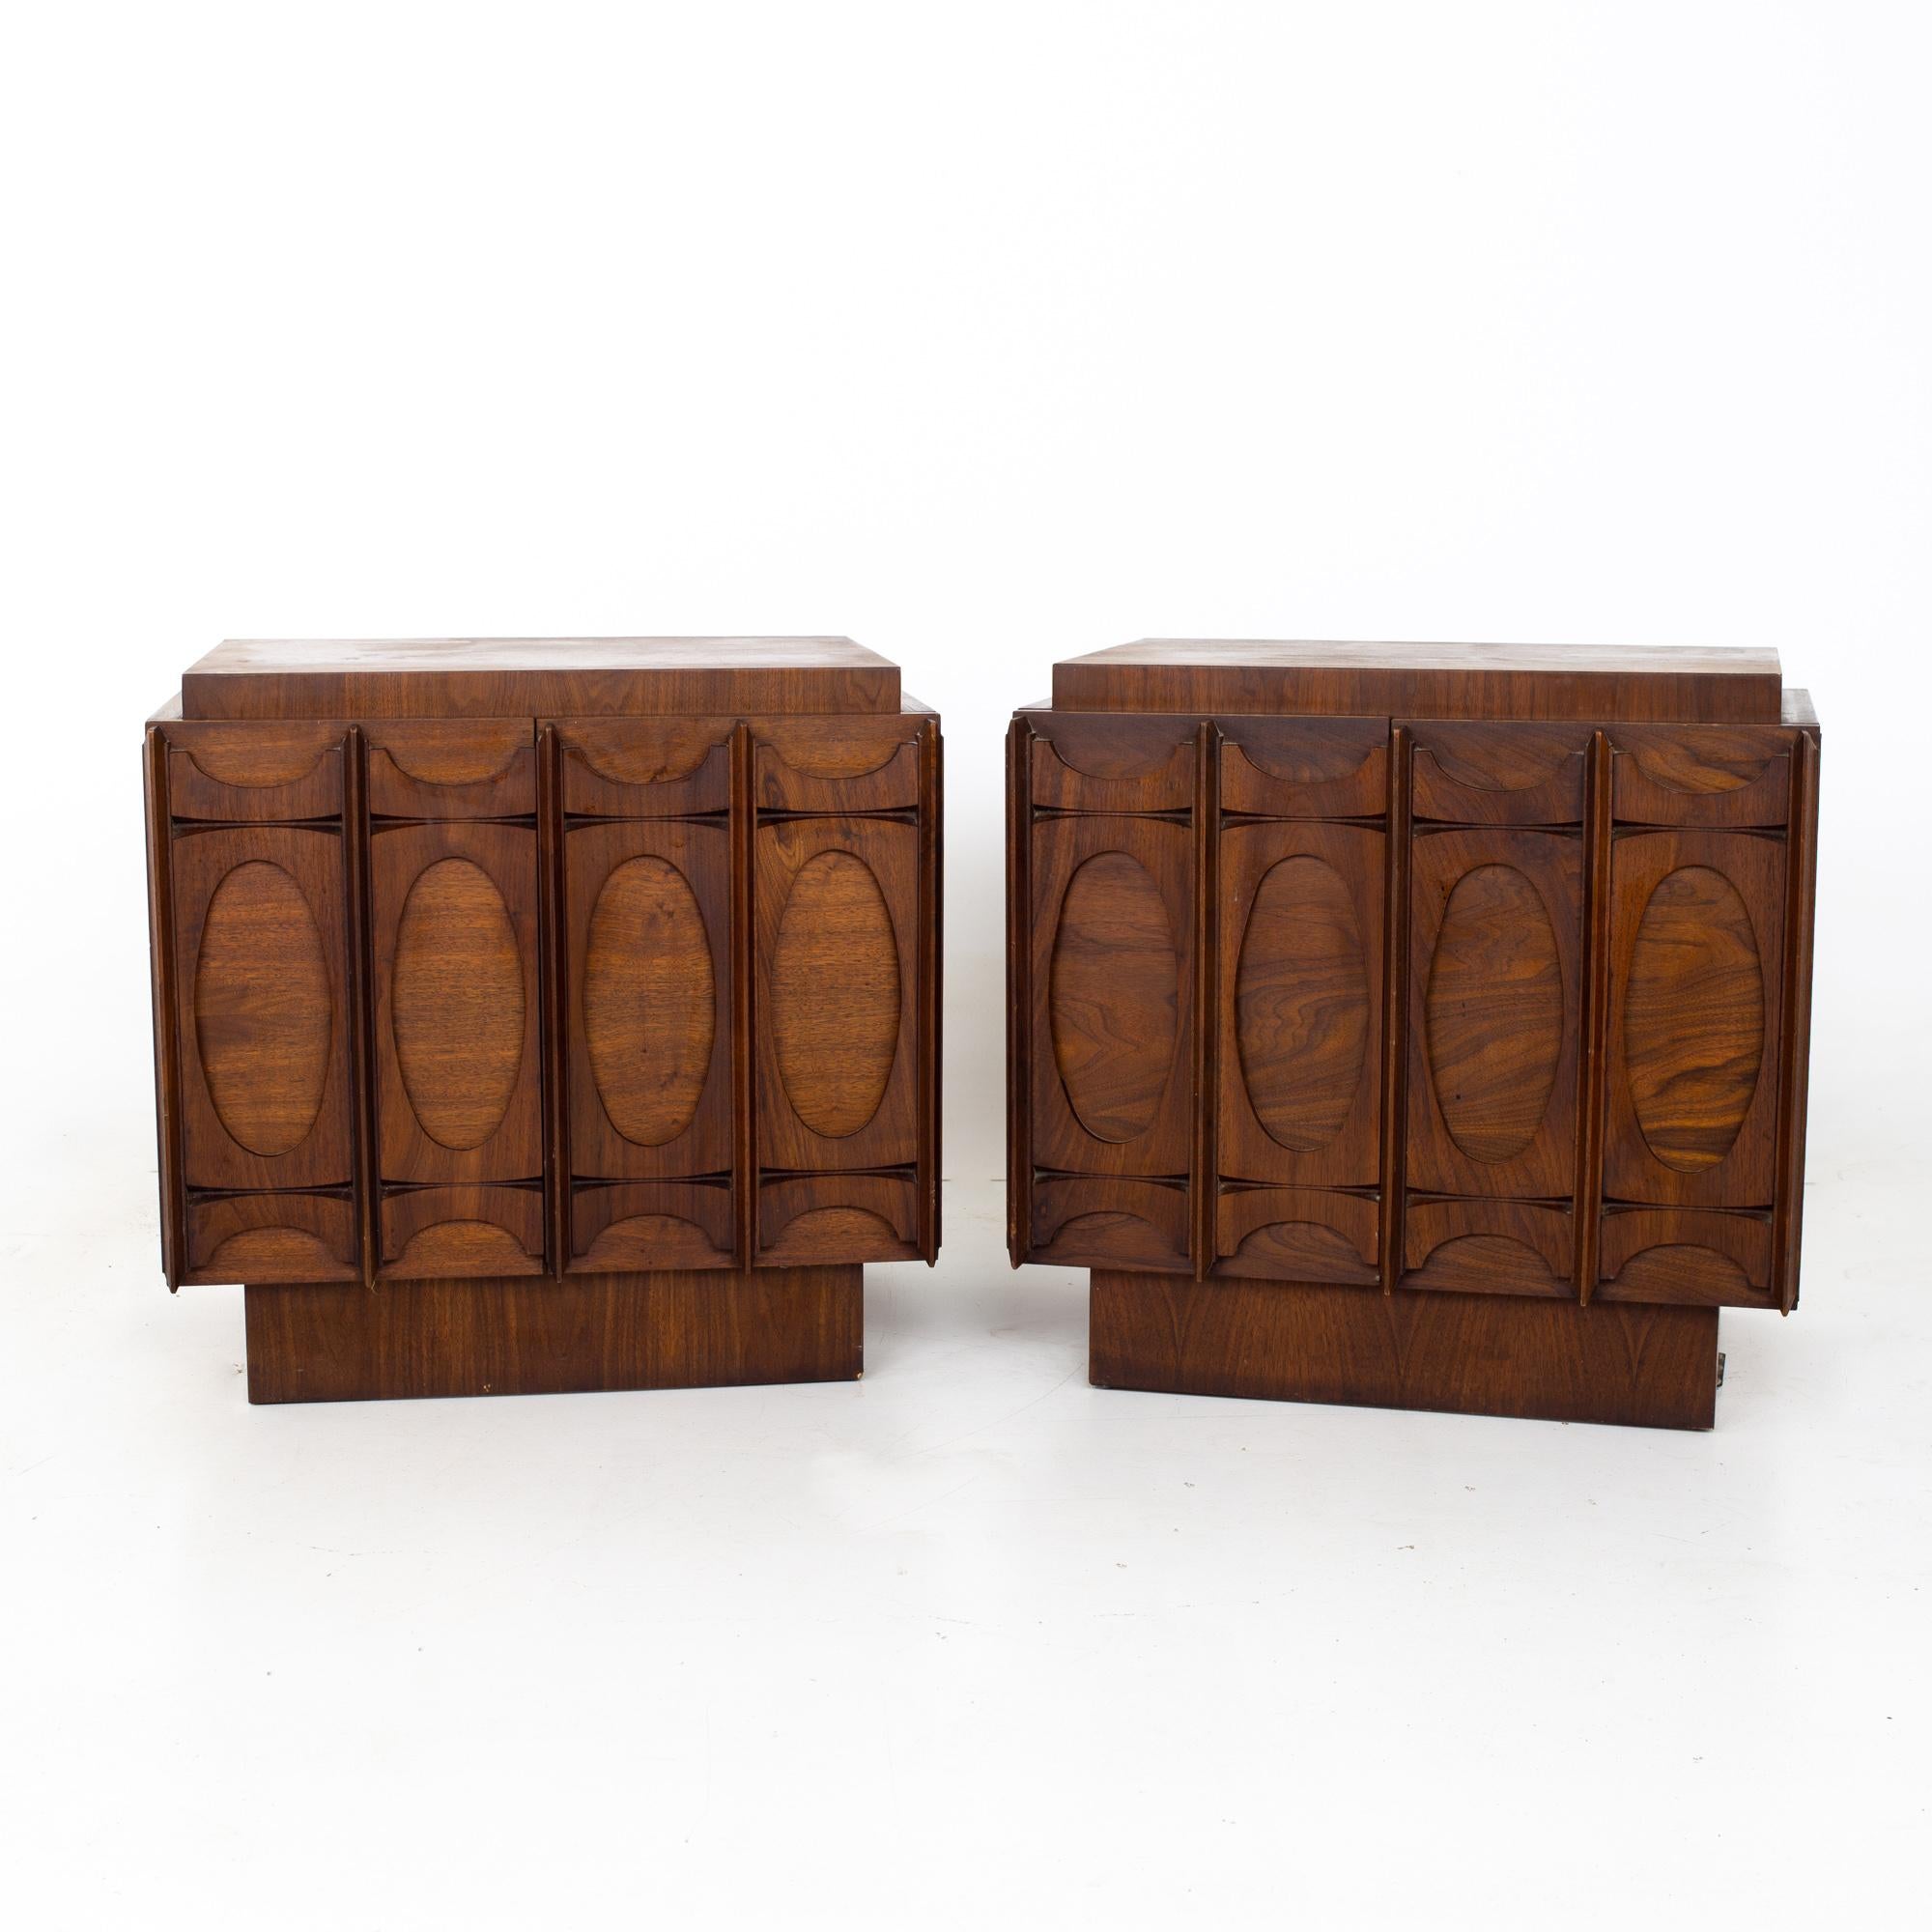 Tobago Canadian brutalist mid century nightstands - Pair

Each nightstand measures: 26 wide x 16 deep x 25.5 inches high

All pieces of furniture can be had in what we call restored vintage condition. That means the piece is restored upon